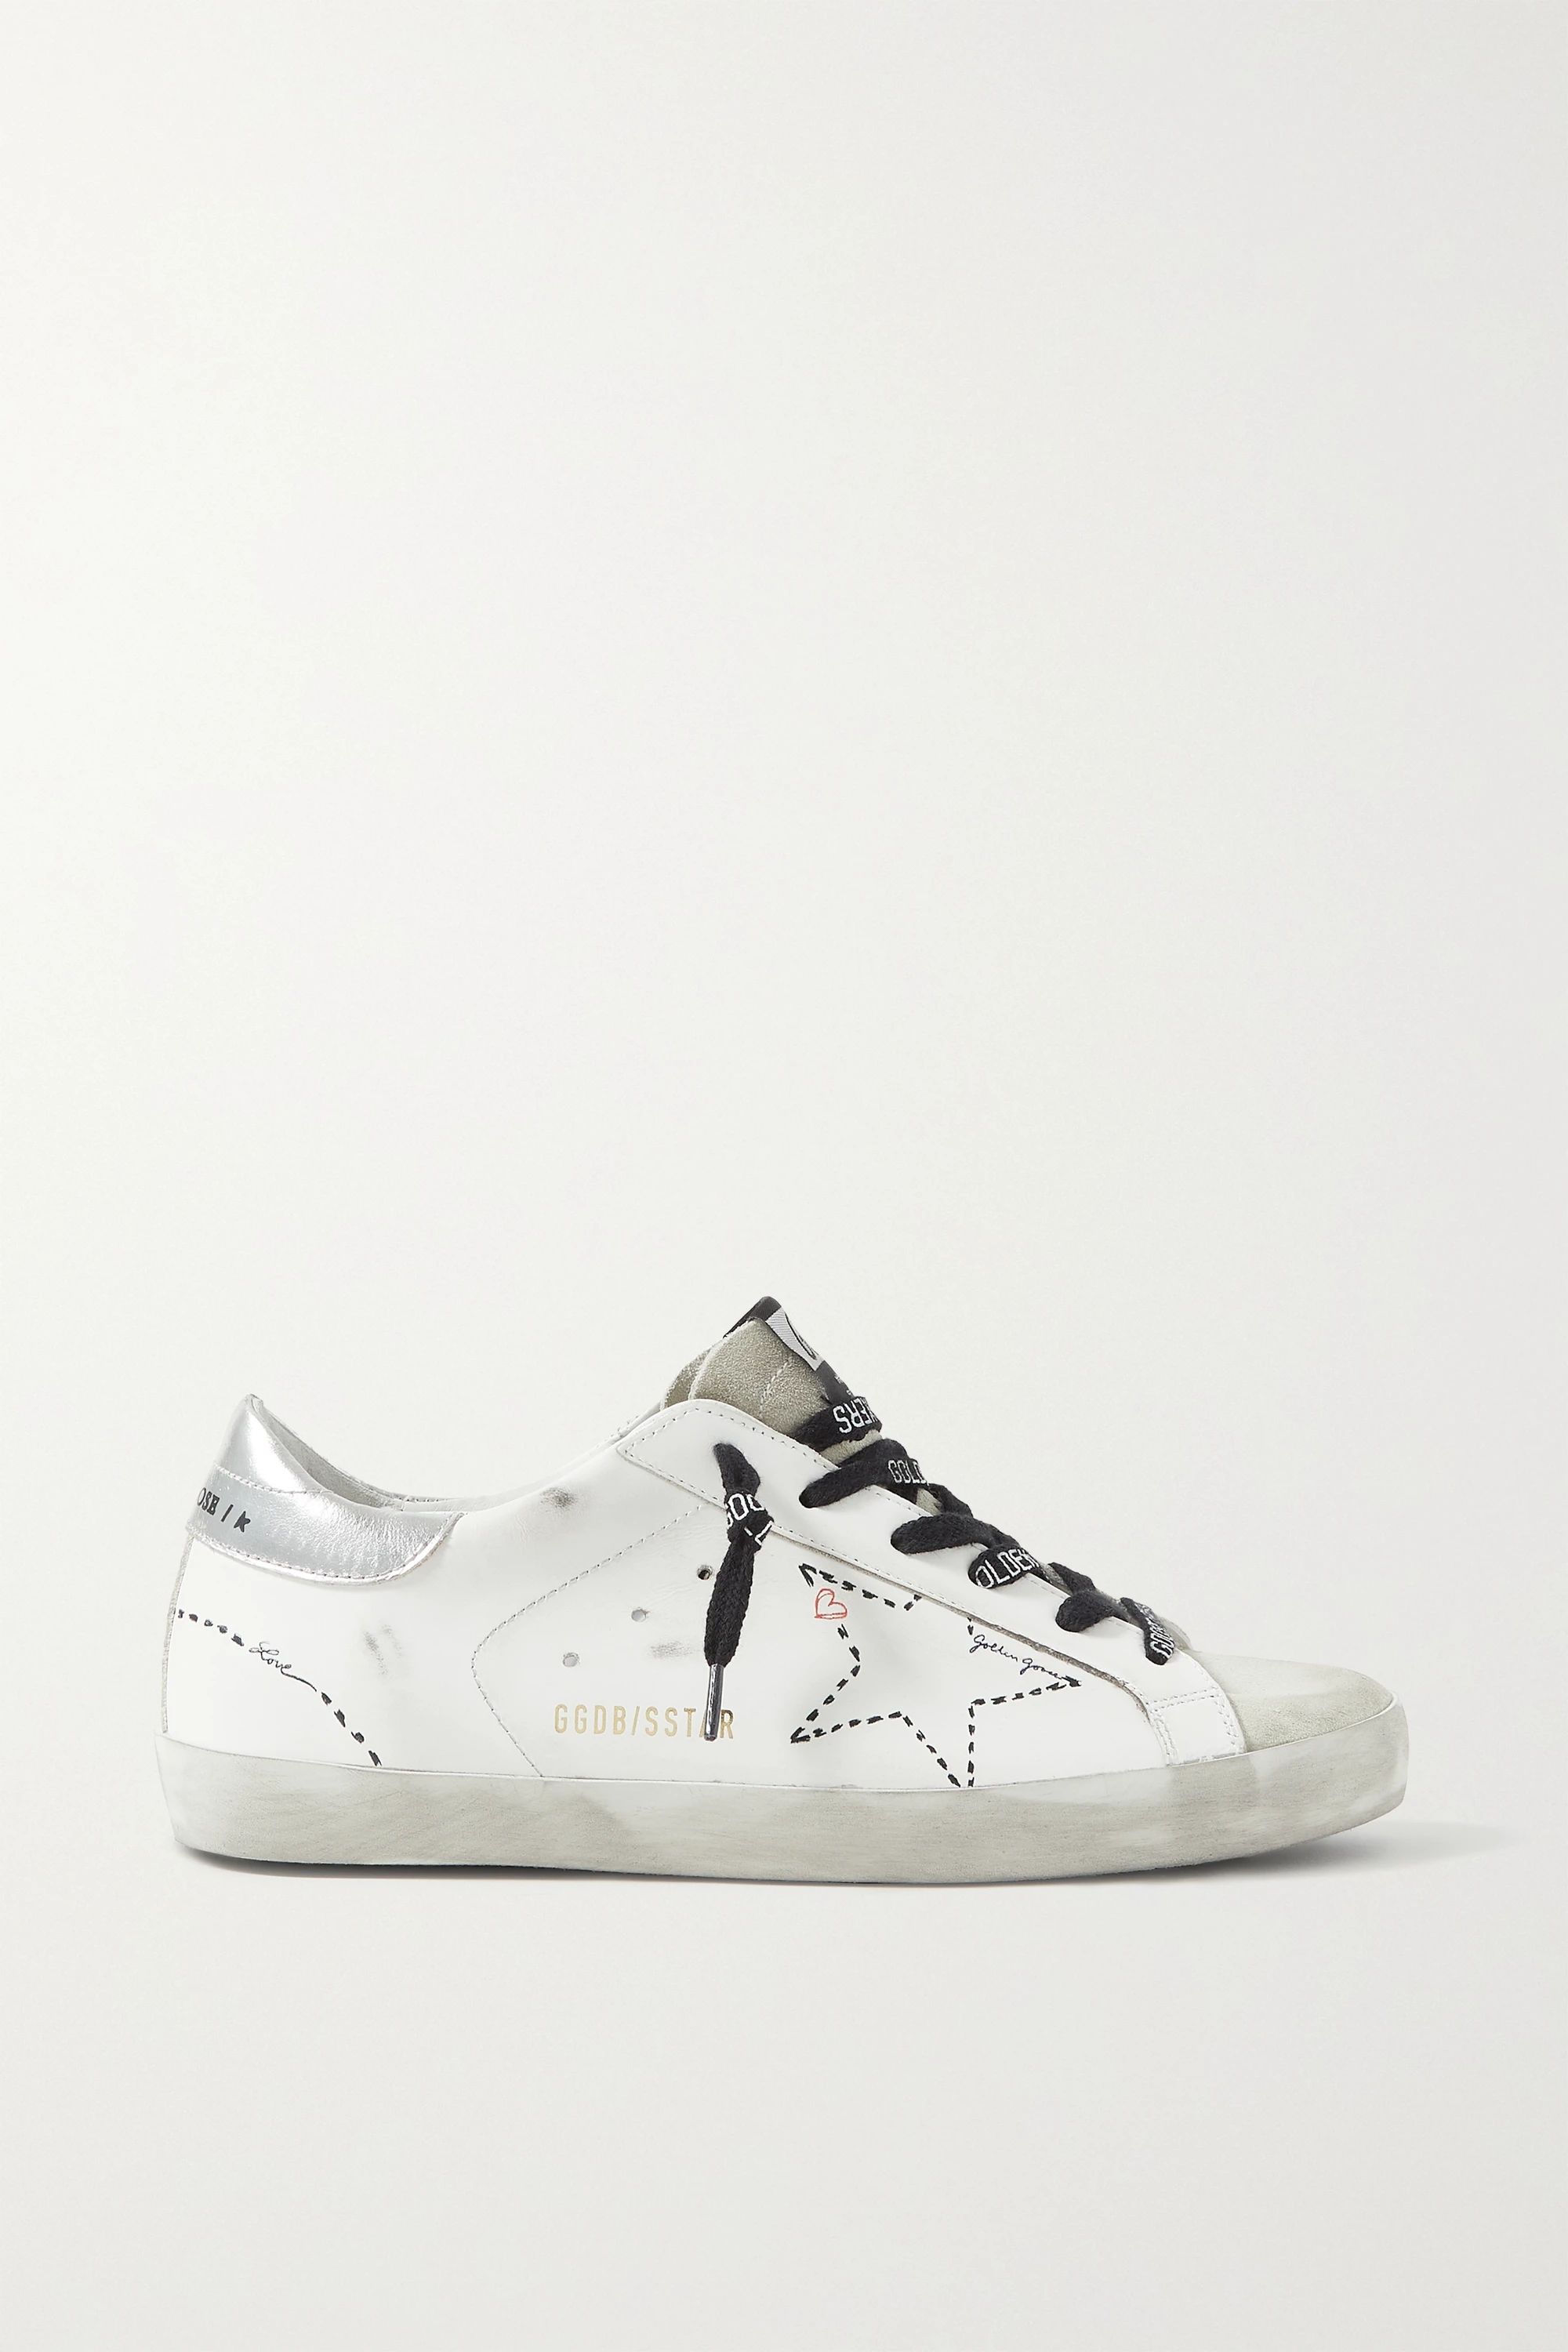 White Superstar distressed leather and suede sneakers | Golden Goose | NET-A-PORTER | NET-A-PORTER (US)